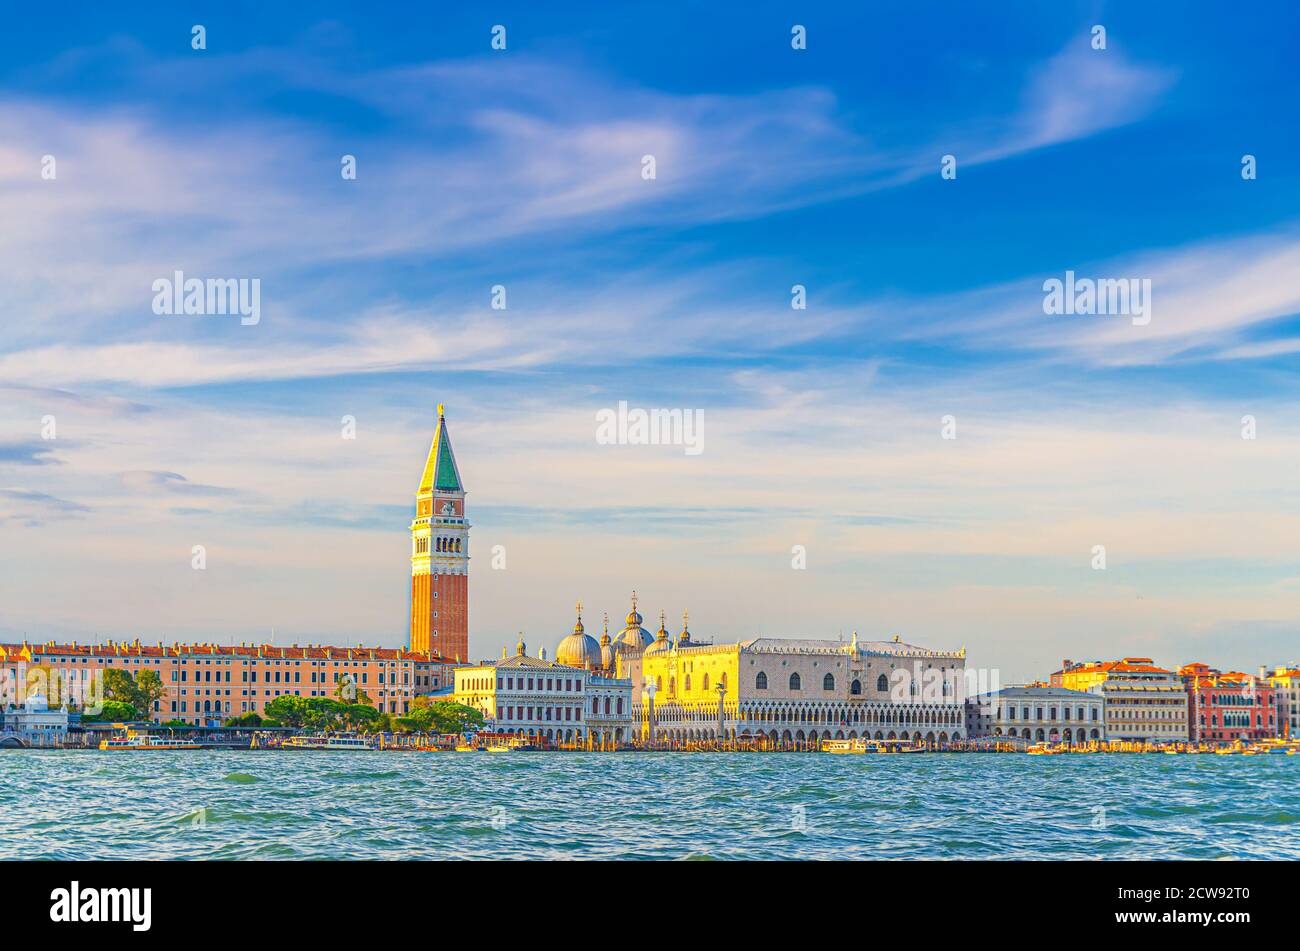 Venice cityscape with San Marco basin of Venetian lagoon water, Procuratie Vecchie, Campanile bell tower, Biblioteca Marciana Library and Doge's Palace Palazzo Ducale building, Veneto Region, Italy Stock Photo